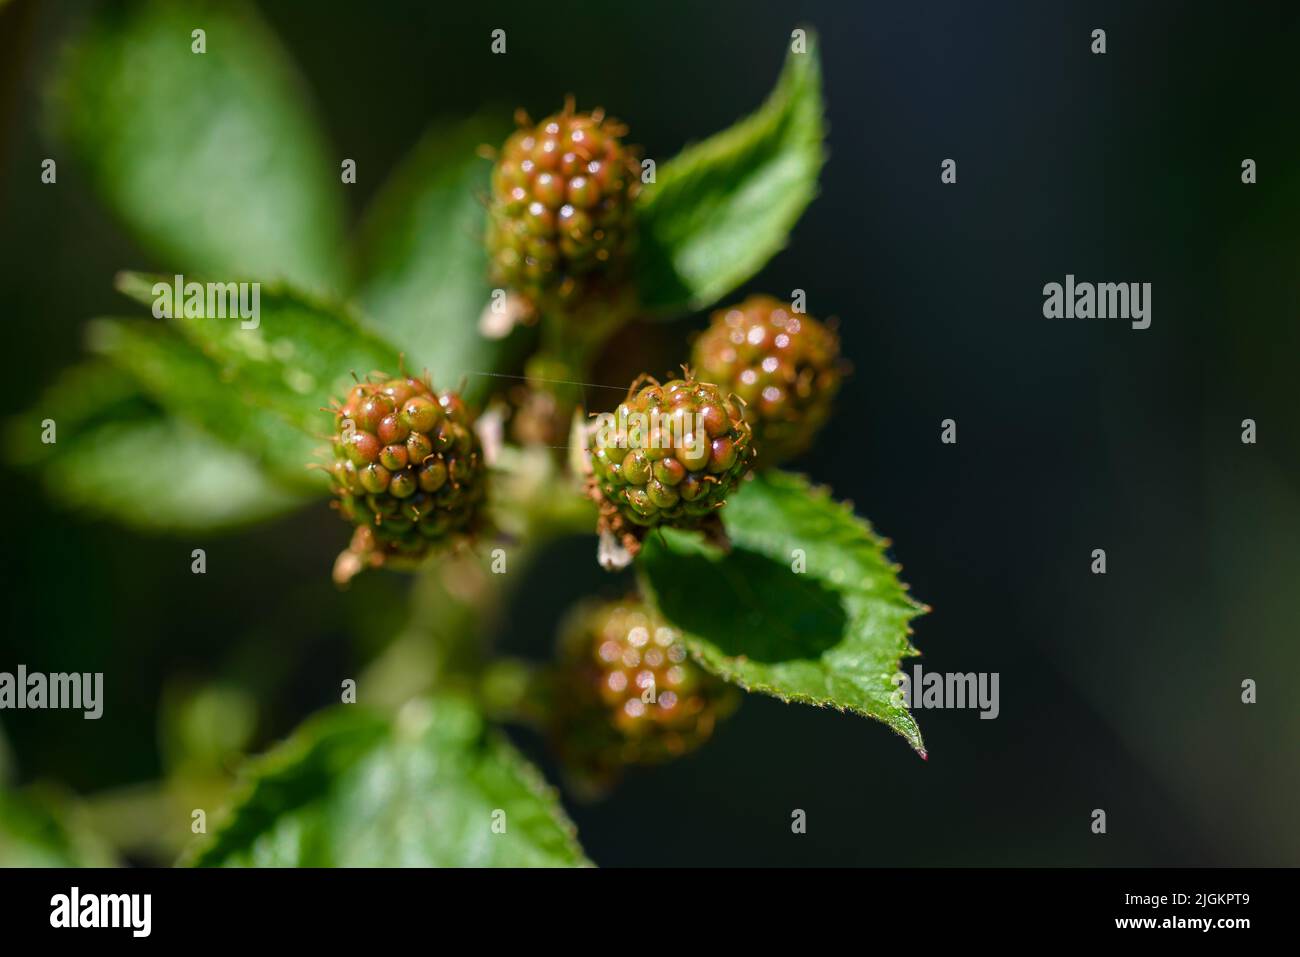 Close view of a blackberry plant with some still unripe fruits. Stock Photo